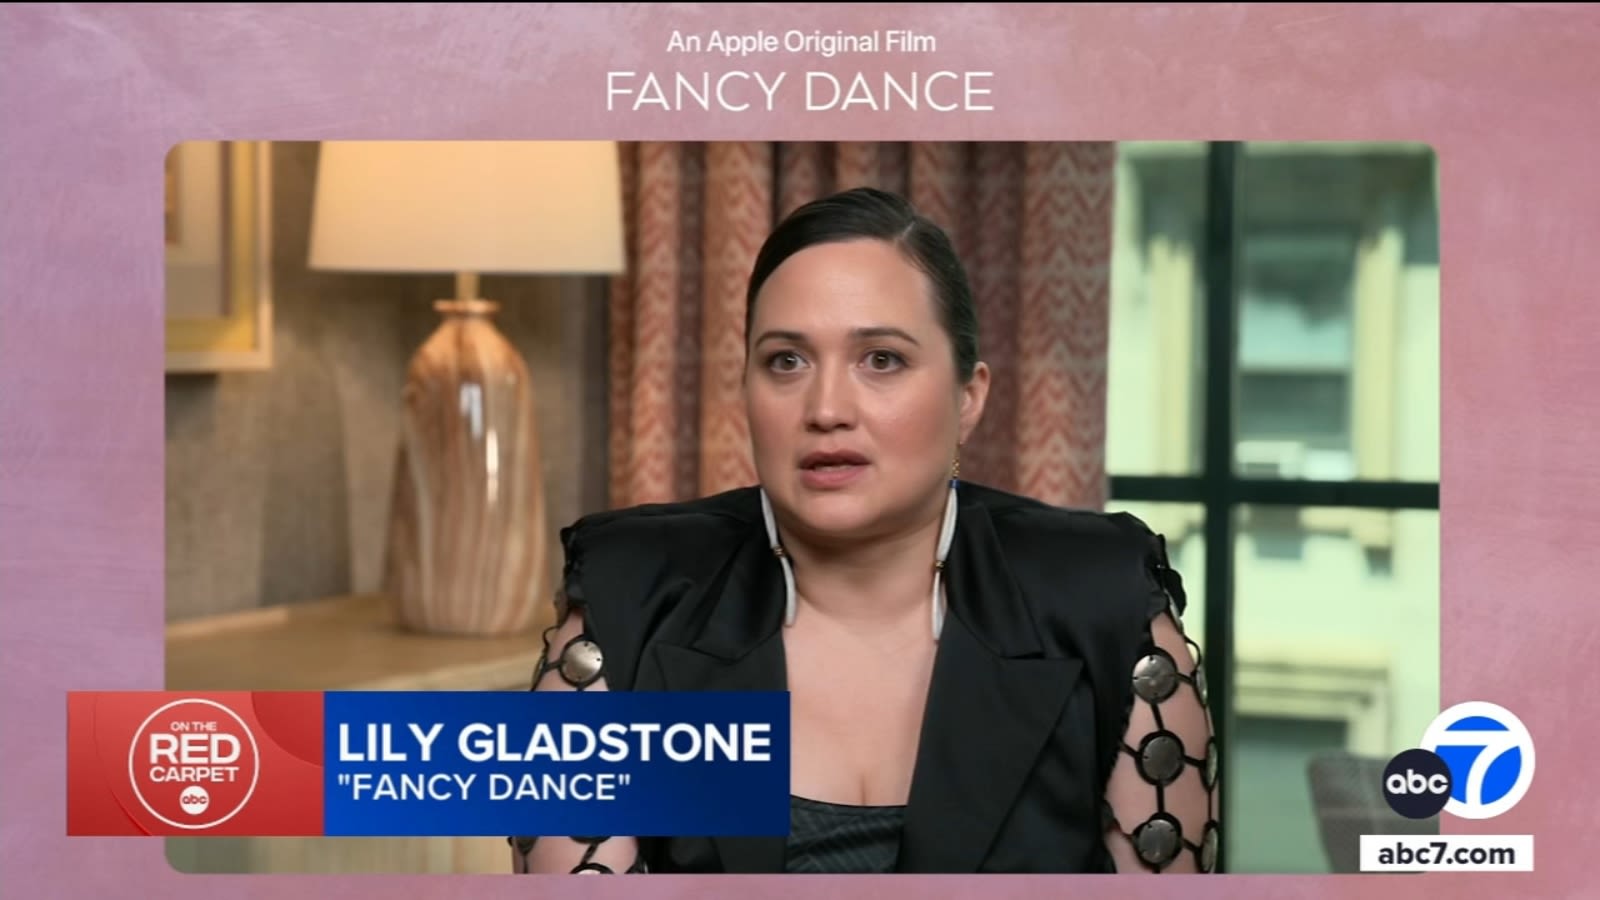 Lily Gladstone balances heart, family, humor in 'Fancy Dance,' story of missing Indigenous woman